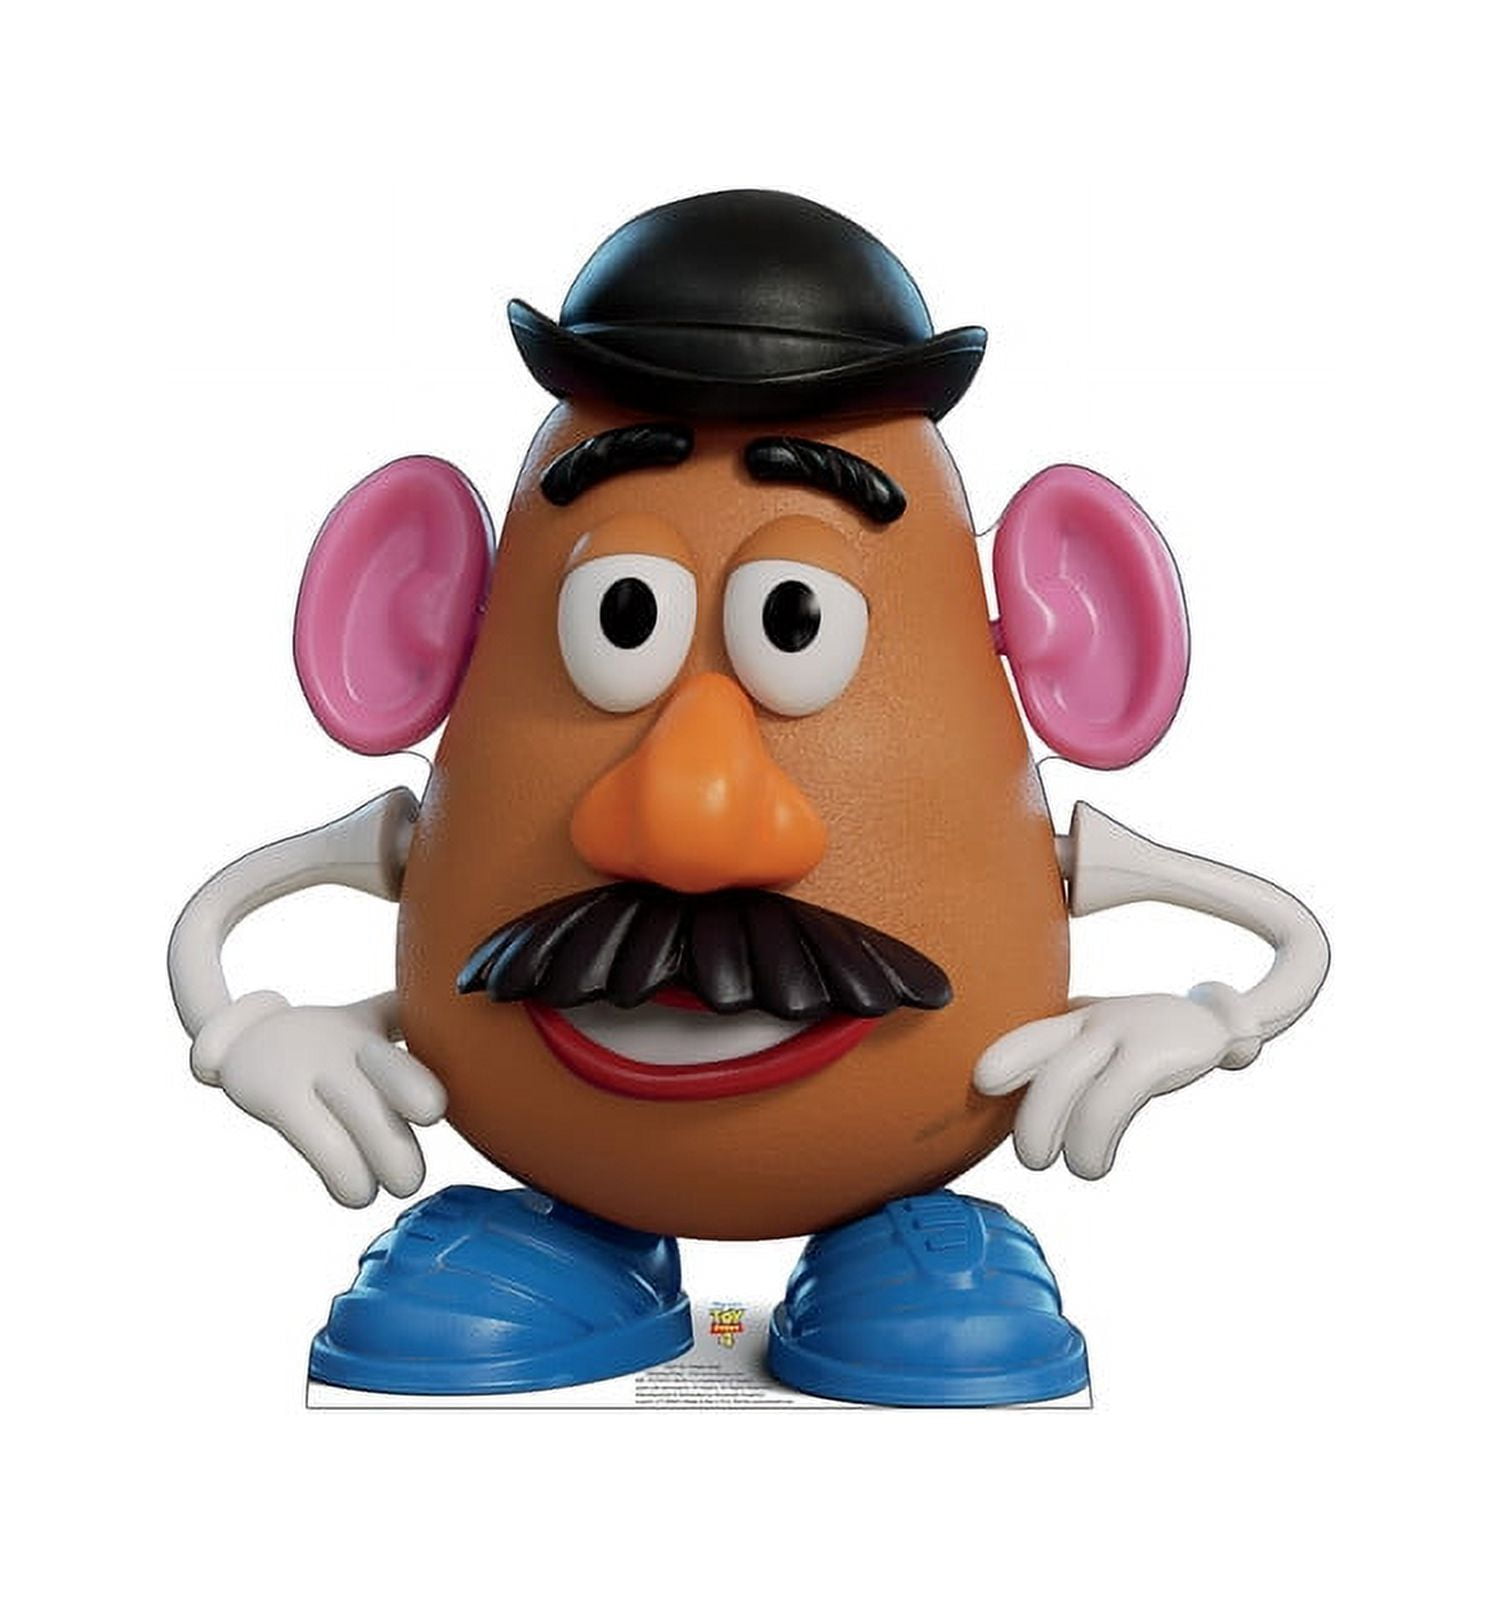 Mr Potato Head (from Disney's Toy Story 4) Cardboard Stand-Up, 3ft